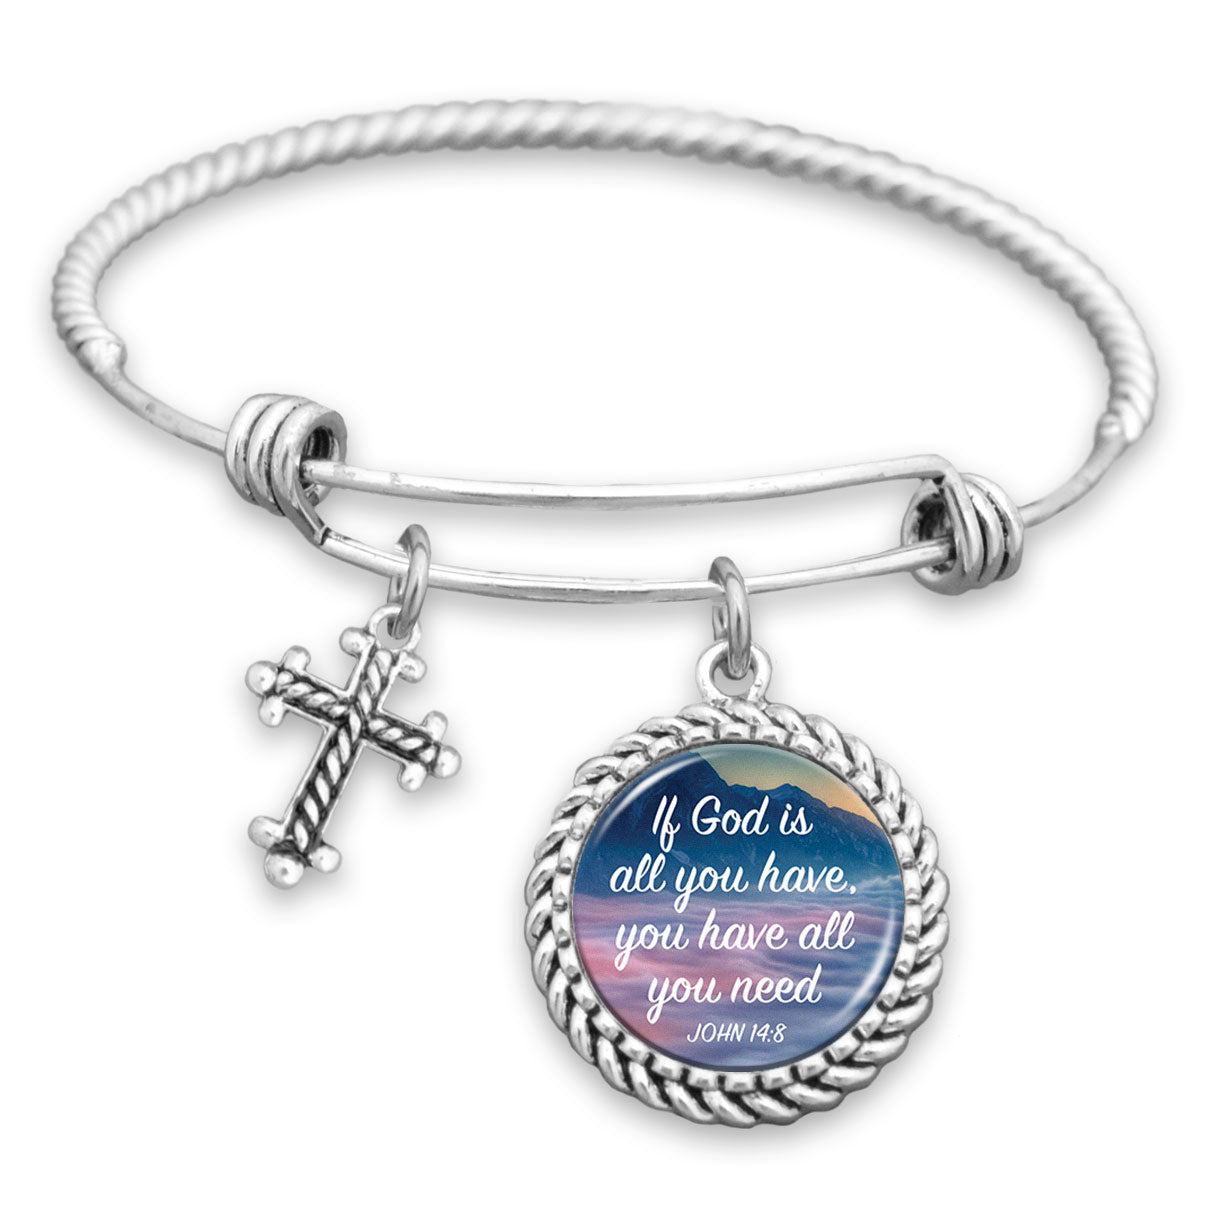 If God Is All You Have, You Have All You Need Charm Bracelet